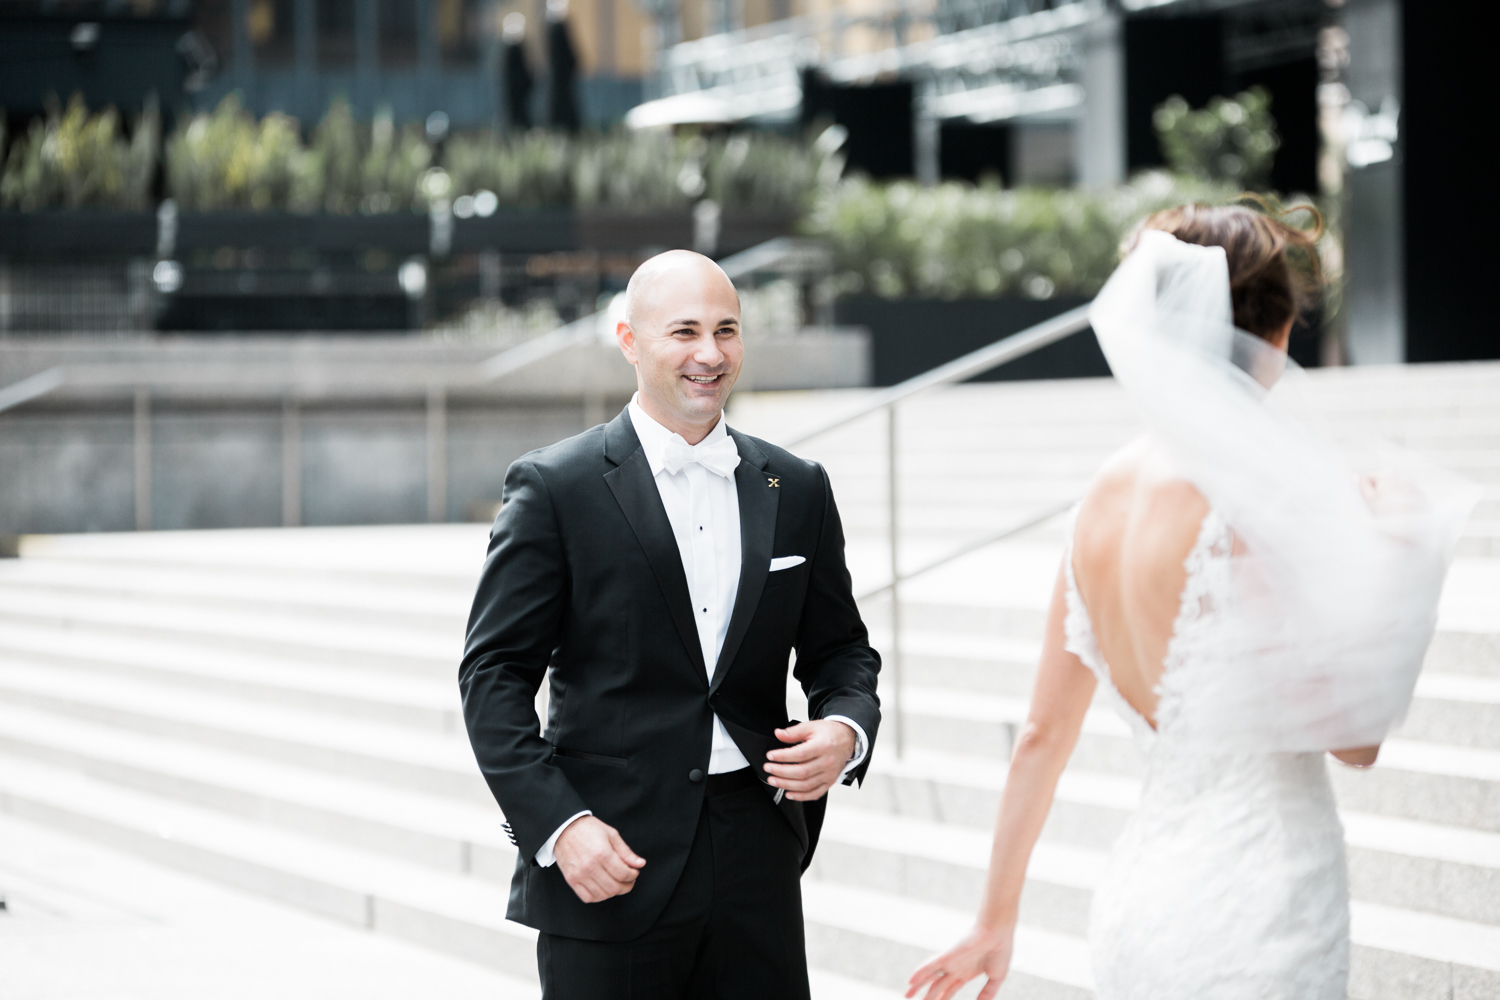 First look at TD tower, Canoe wedding photos